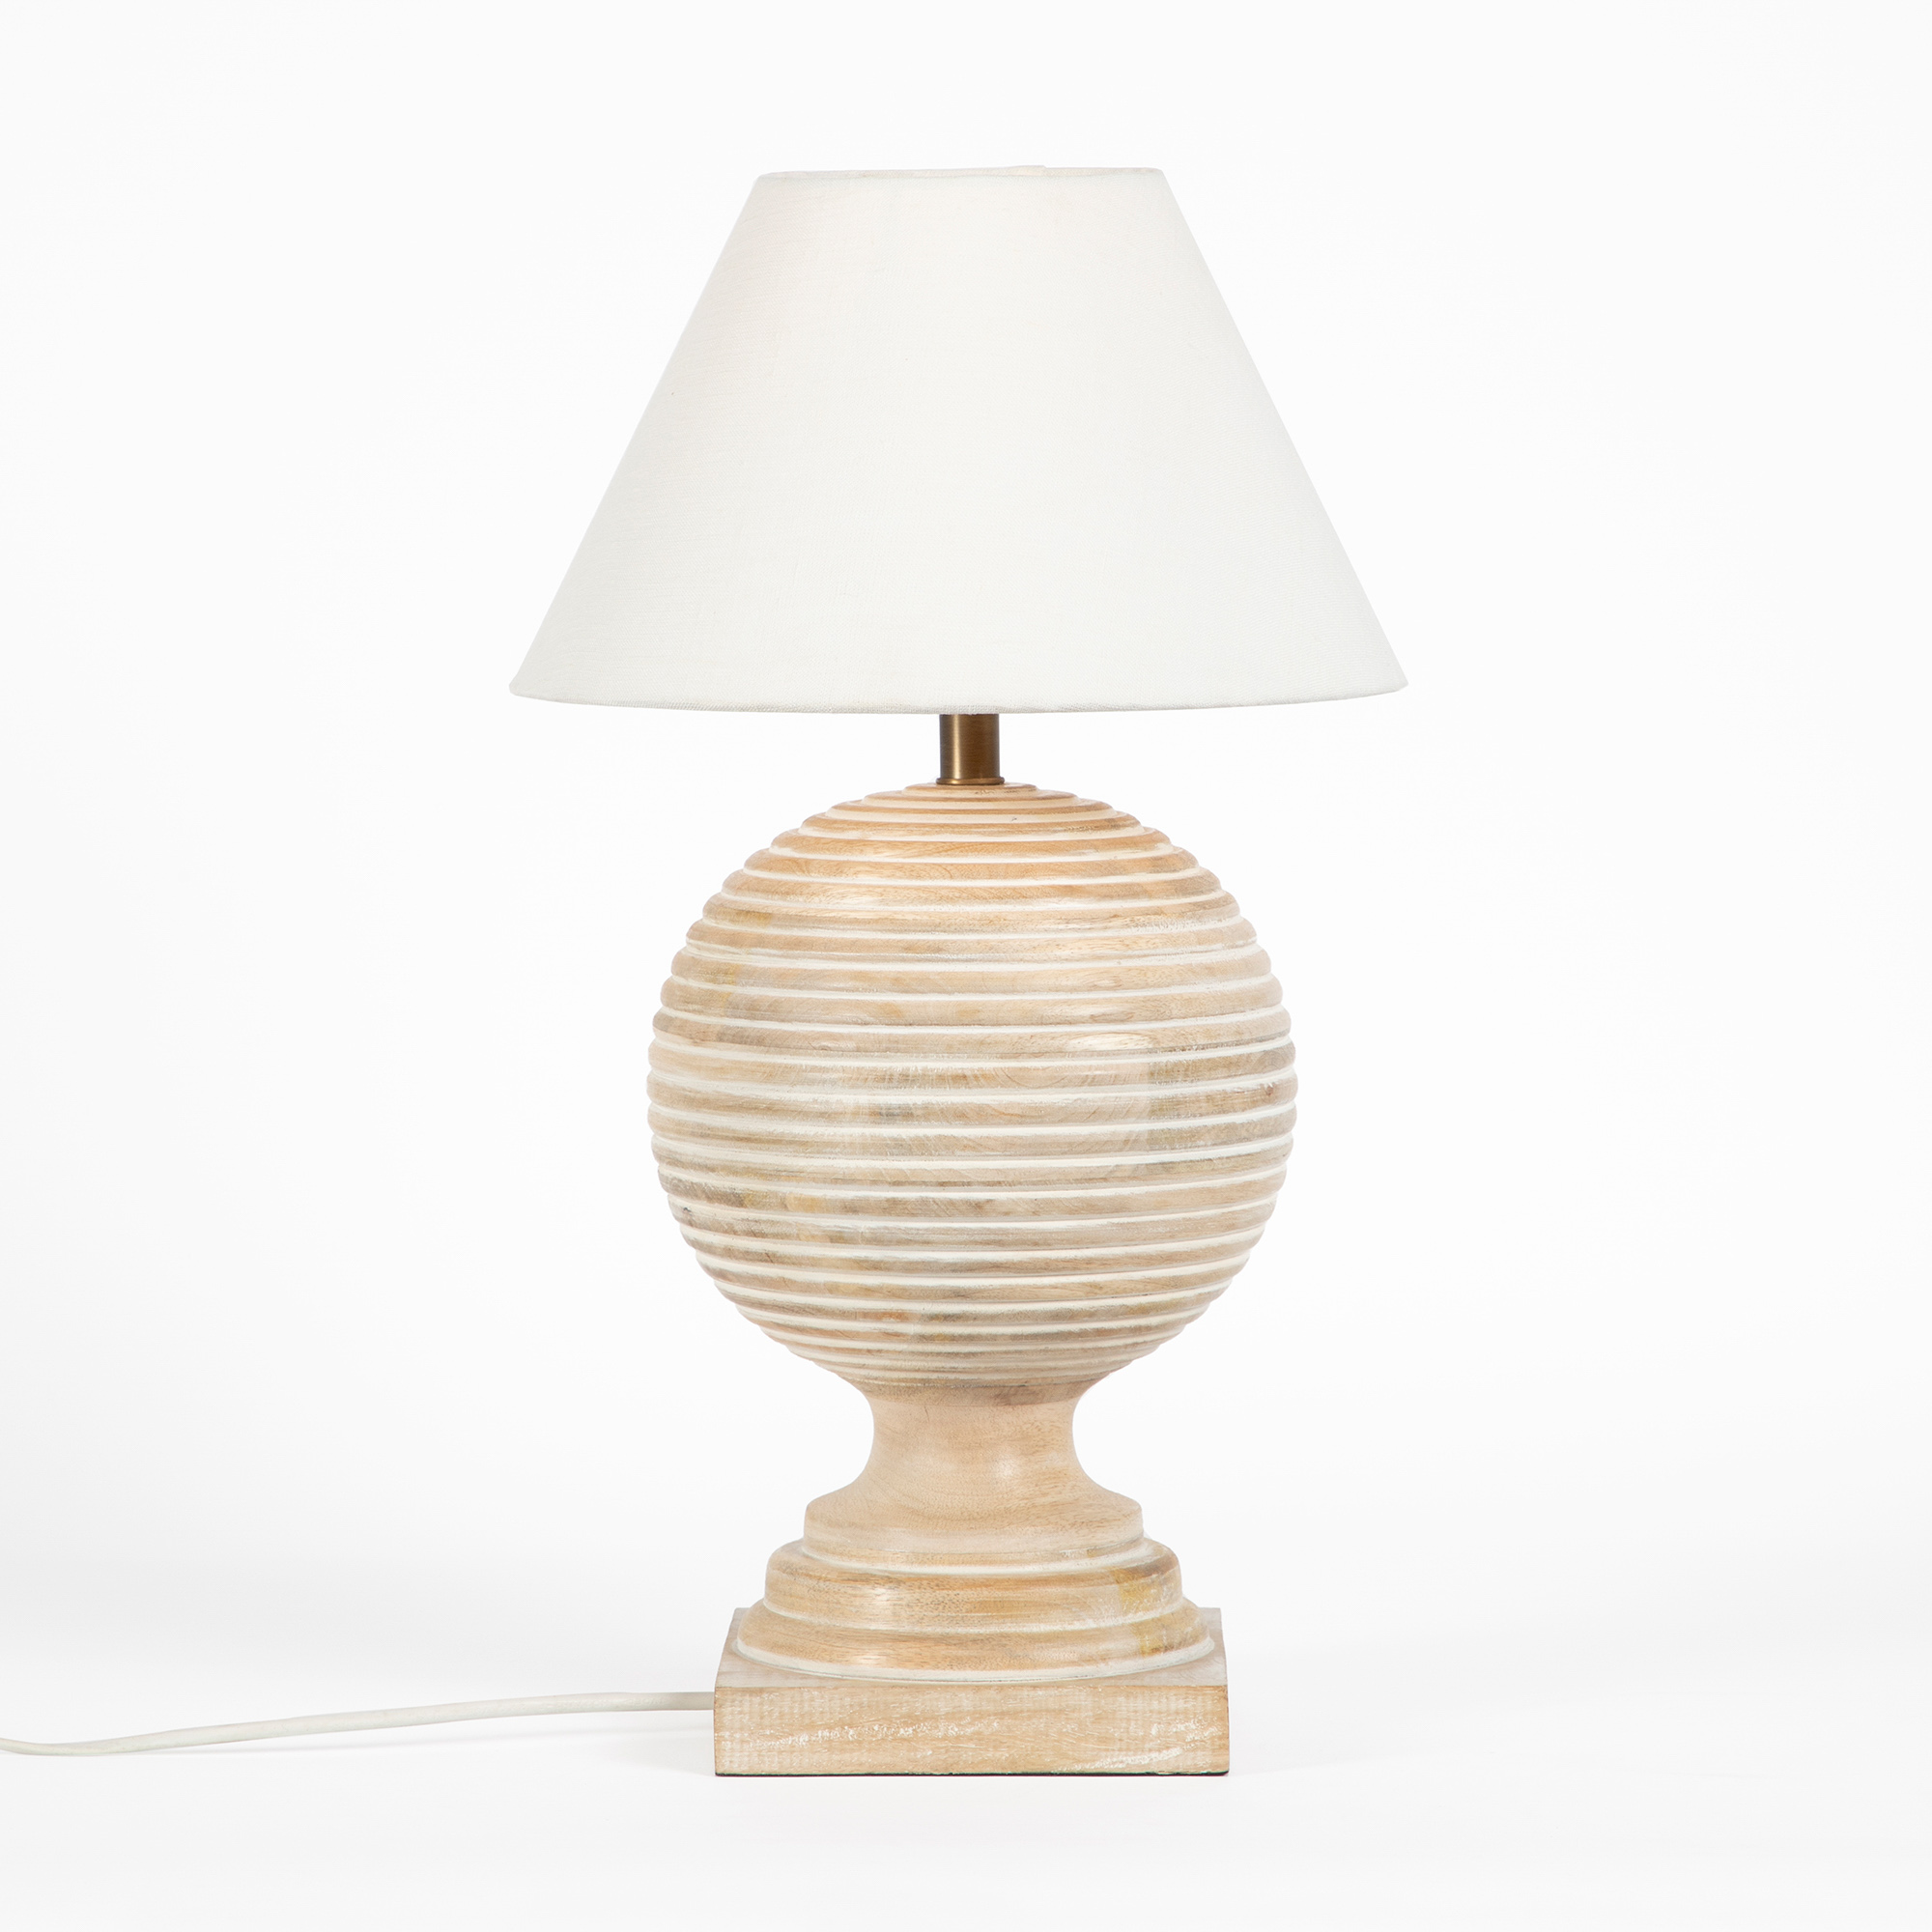 Cairo Wooden Table Lamp